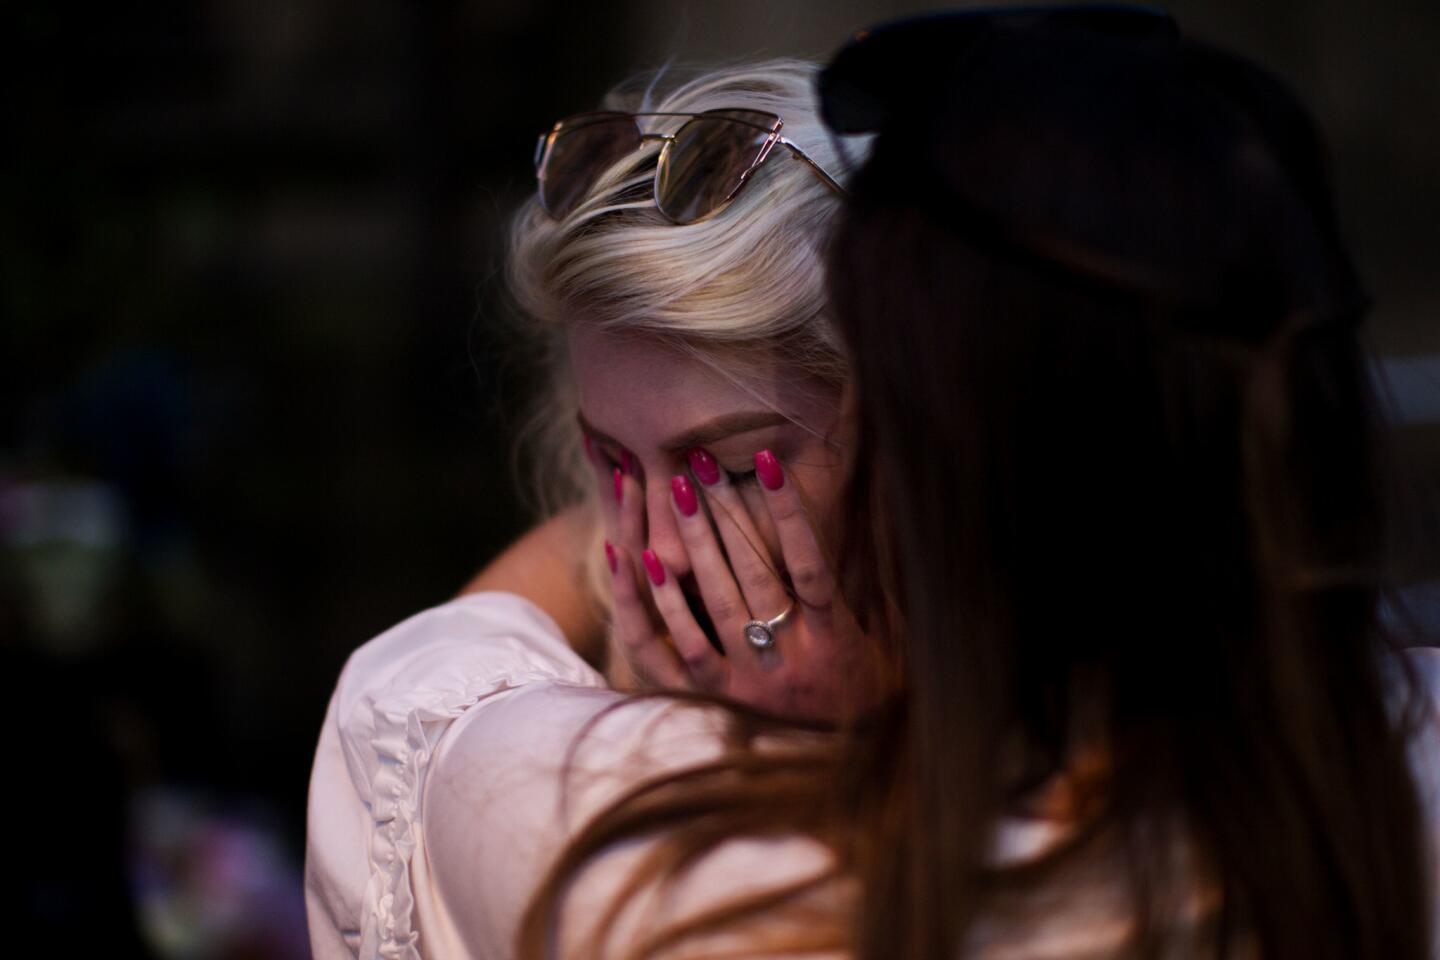 People cry after a vigil in Albert Square in Manchester, England, on May 23, 2017, the day after a suicide attack at an Ariana Grande concert that left 22 people dead.